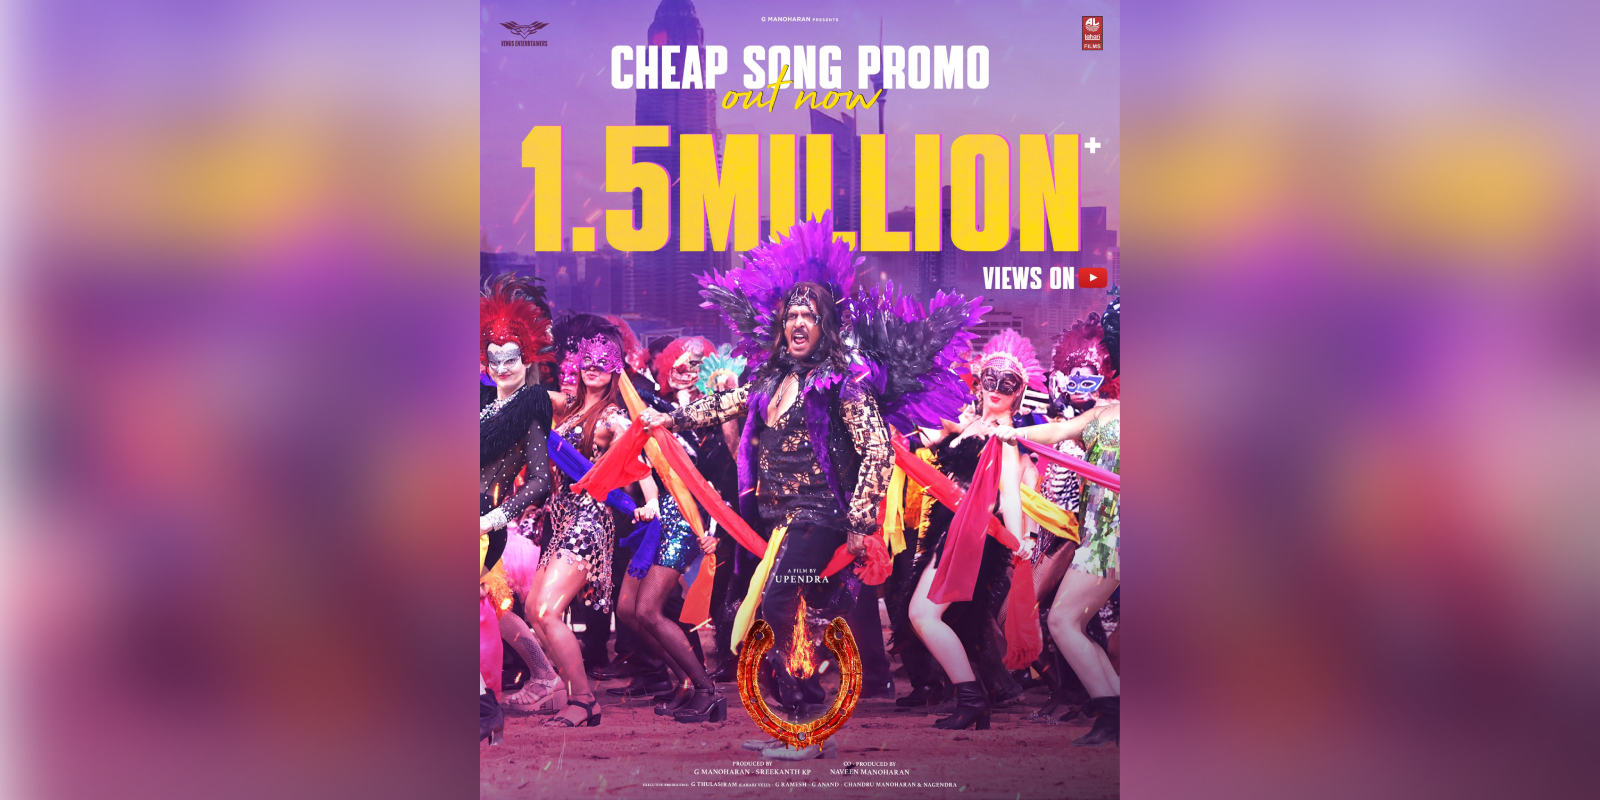 Cheap song promo from Upendra's UI released